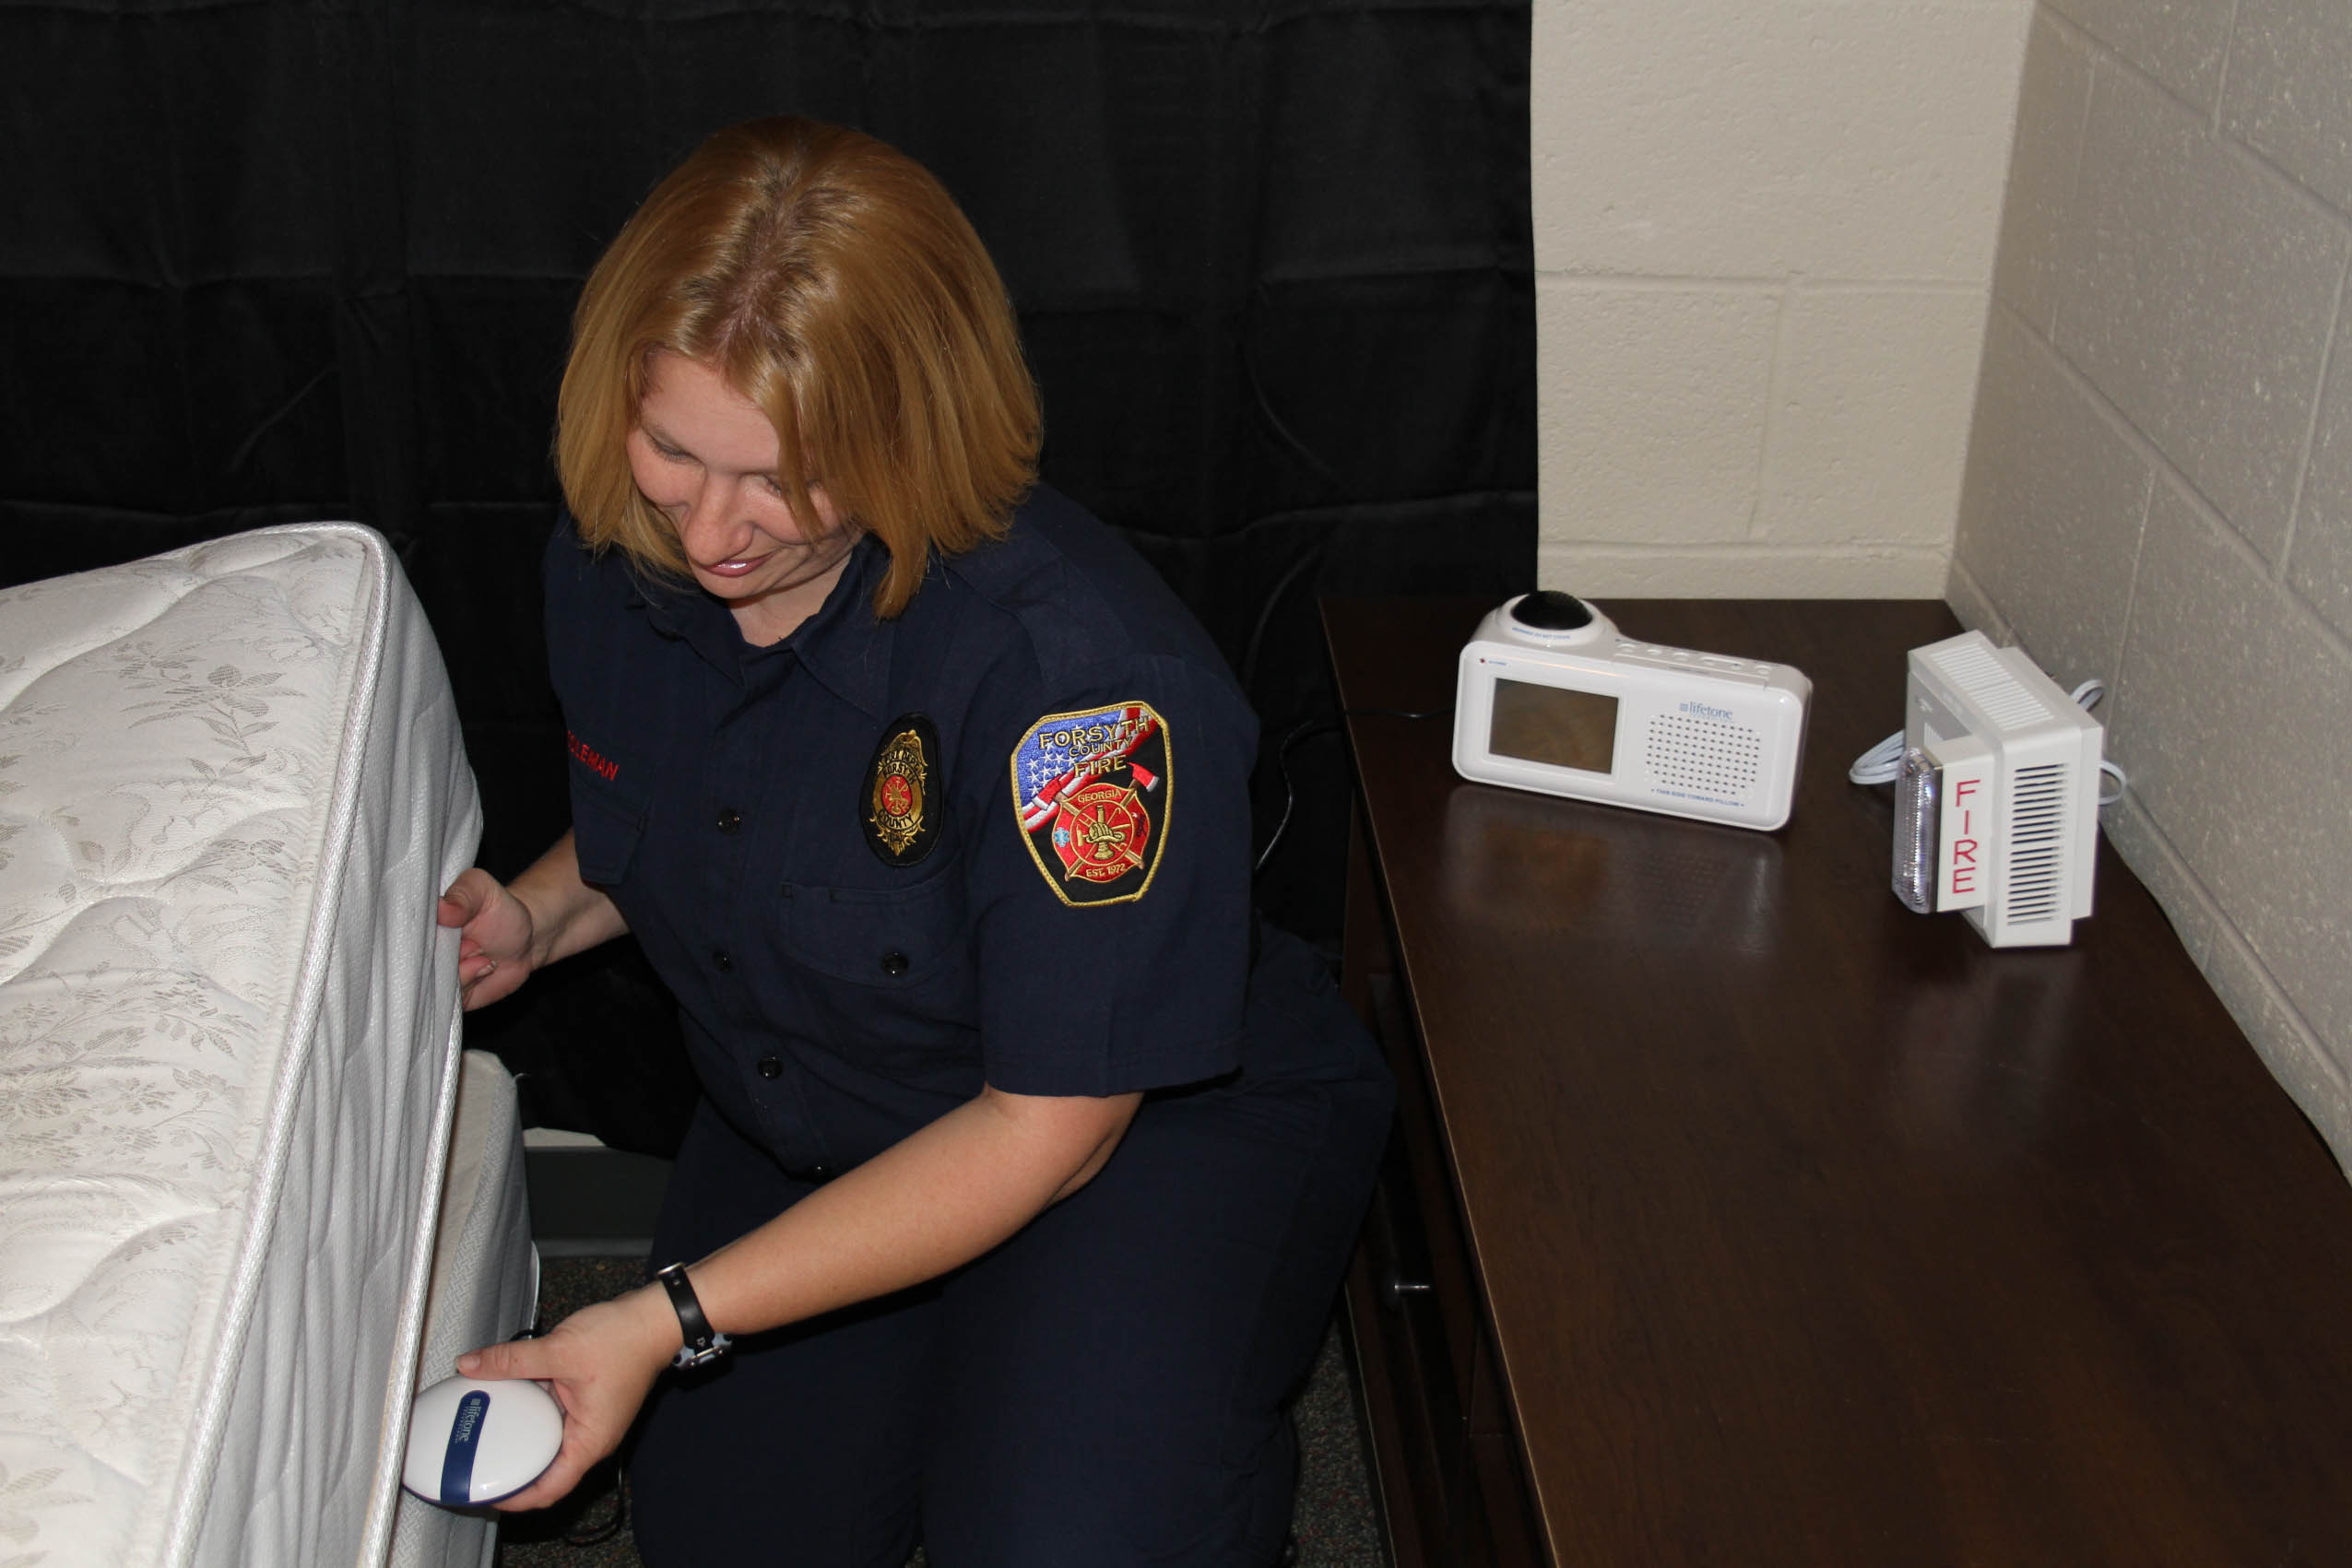 Forsyth County Fire Receives Grant for Devices for the Hearing Impaired